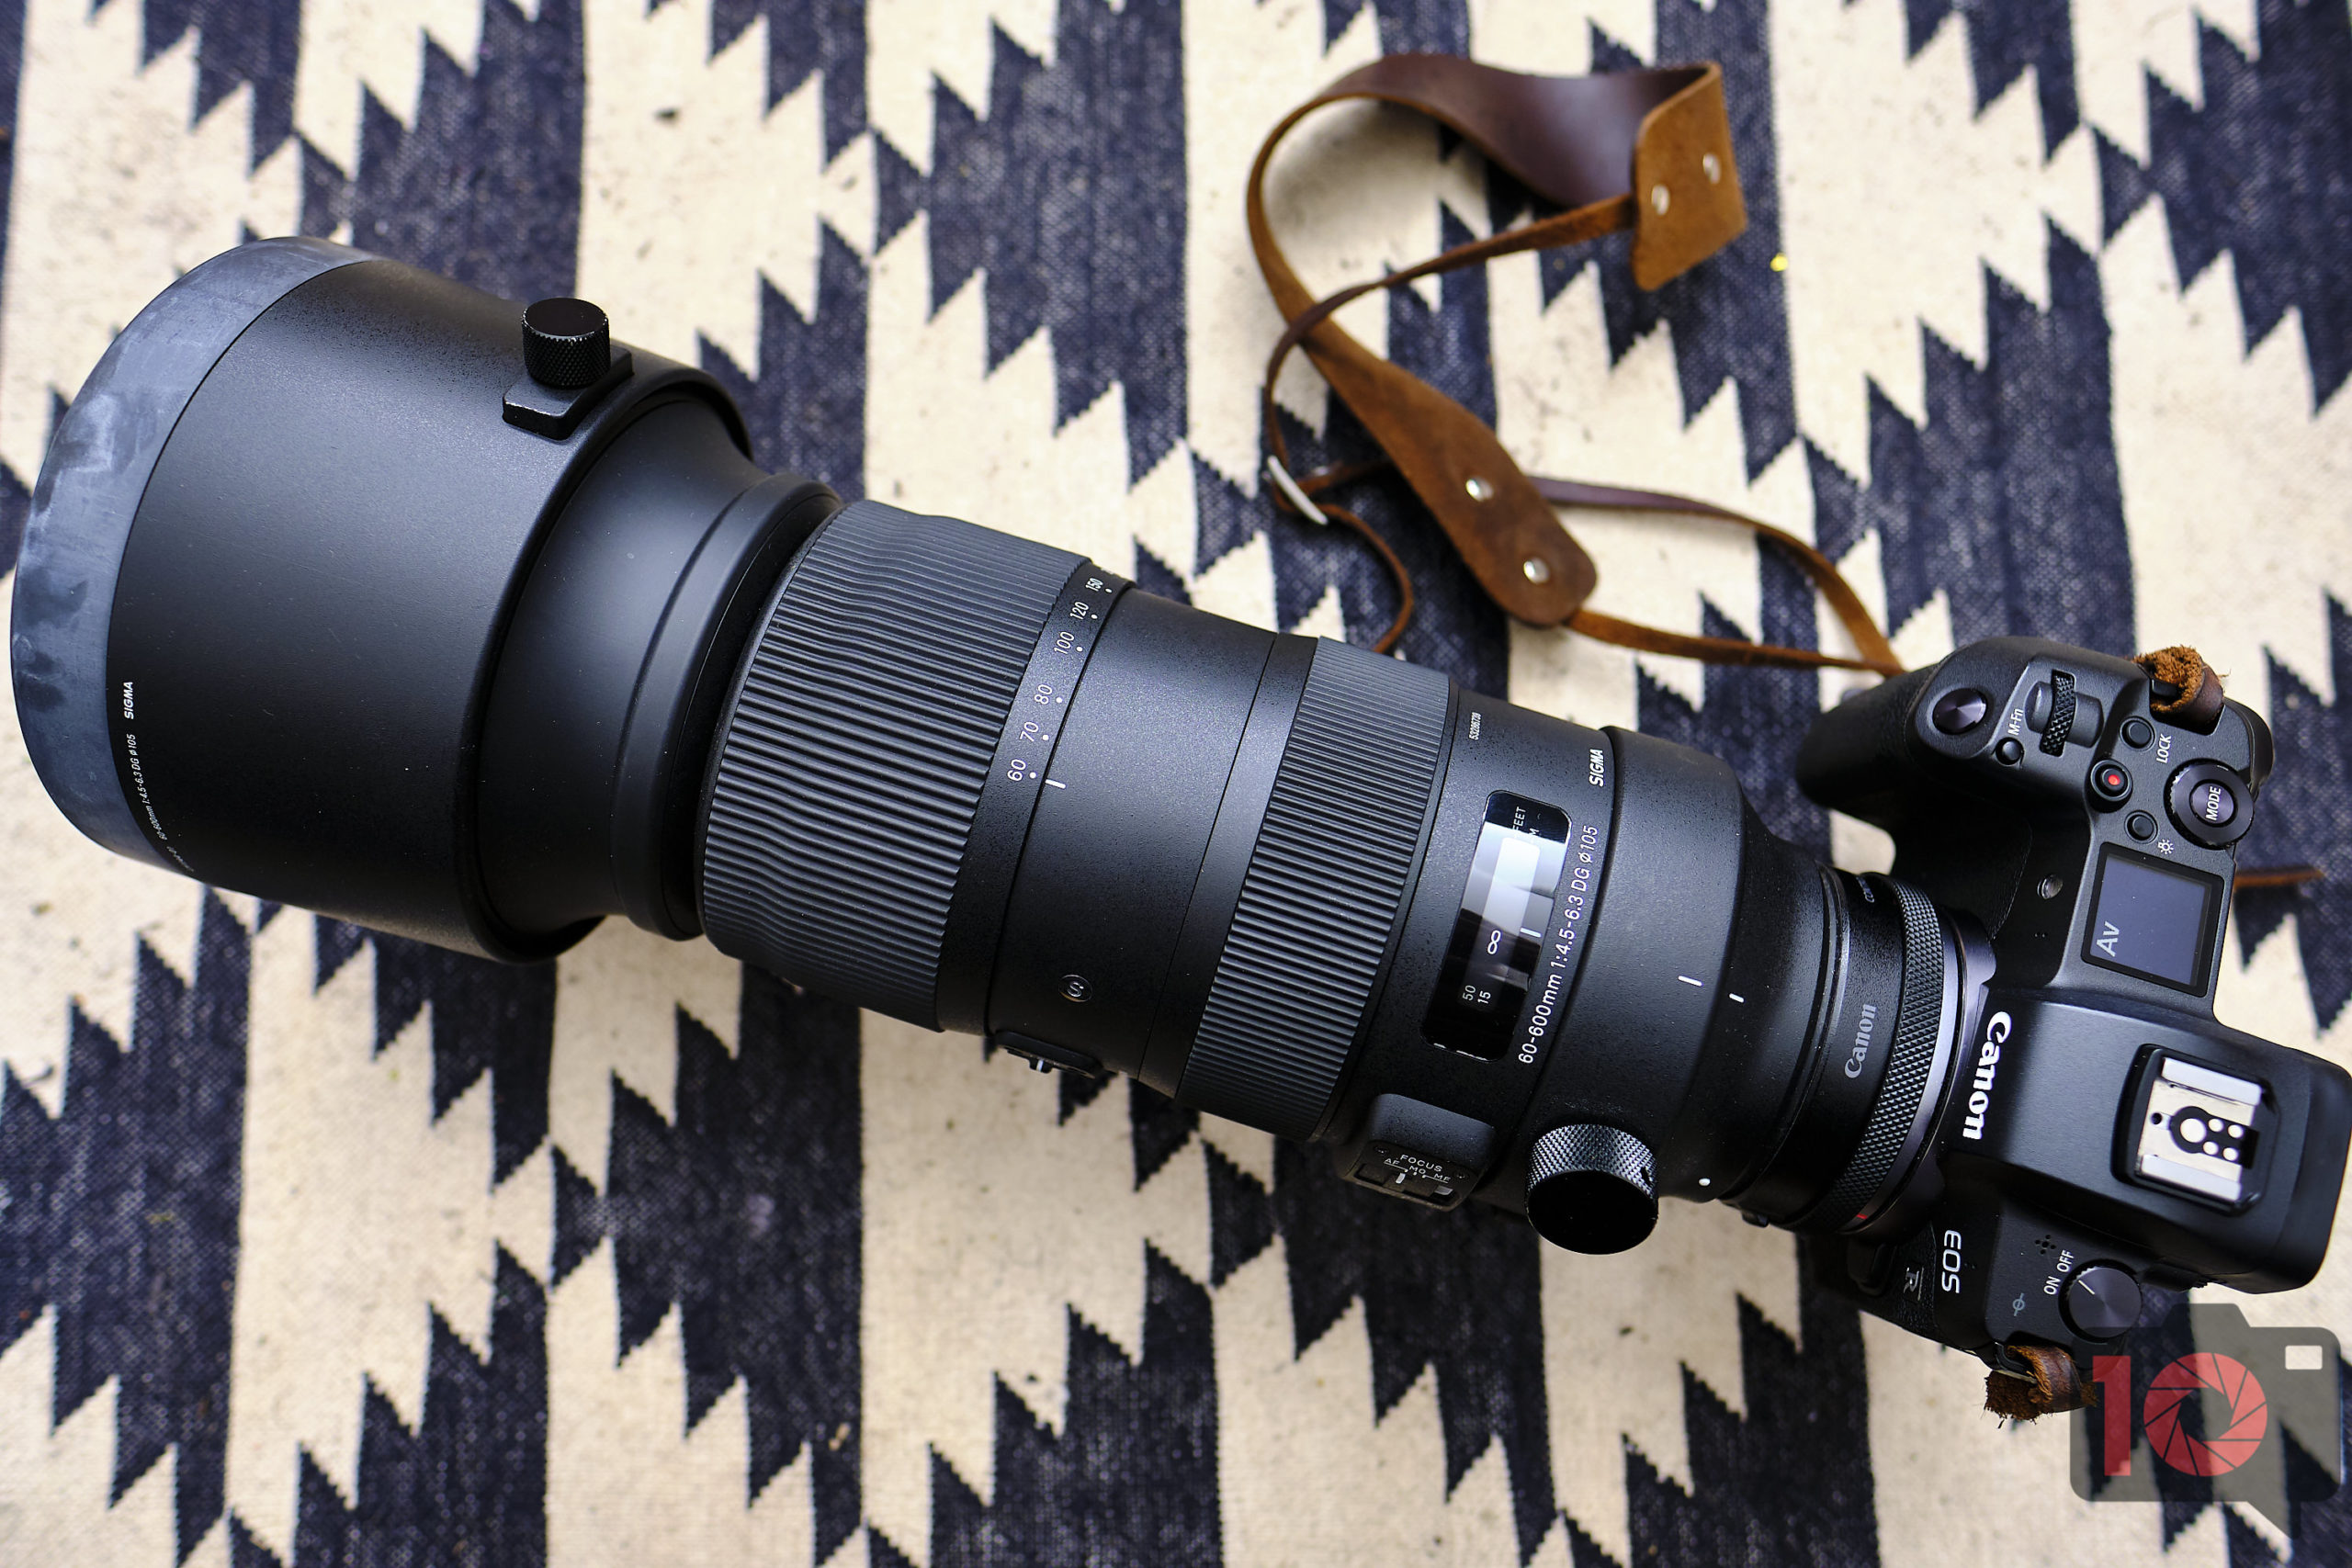 Chris Gampat The Phoblographer Sigma 60-600mm f4.5-6.3 DG Sports review product images 2.81-125s400 1